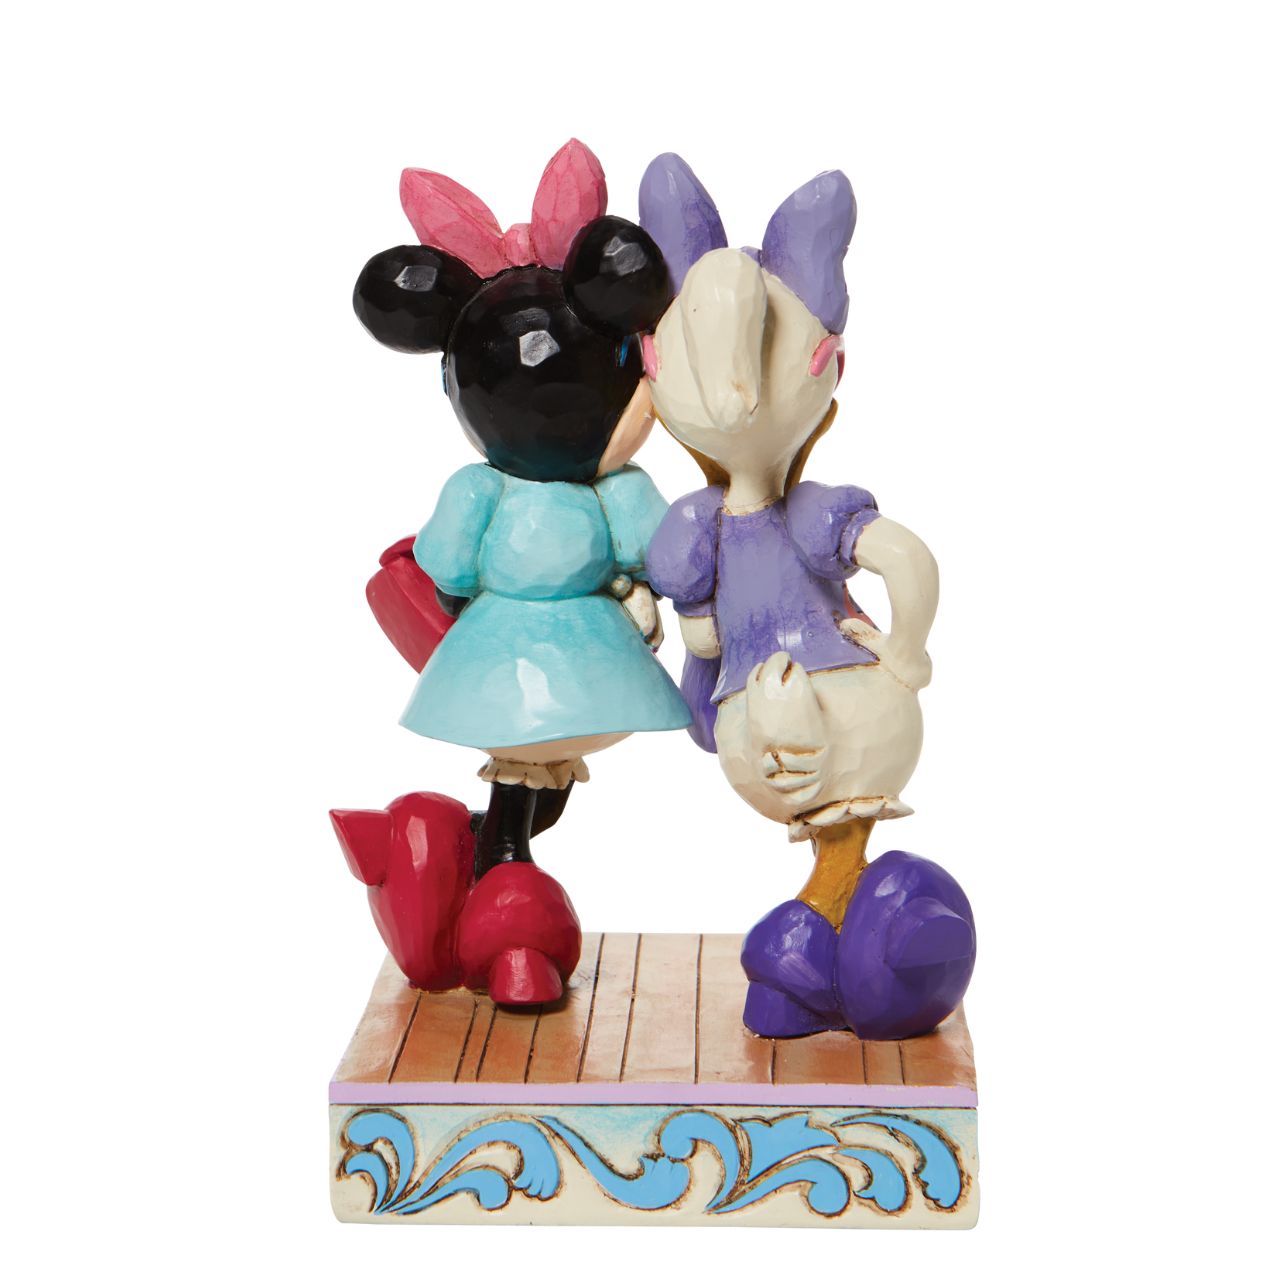 Disney "Fashionable Friends" Minnie and Daisy Figurine by Jim Shore  "Fashionable Friends" Mickey Mouse and Donald Duck would be nothing without their better and more fashionable halves! Minnie and Daisy don their finest duds to hit the town in style. Wearing shades, bows, matching purses and high heels, these ladies strike a power pose.